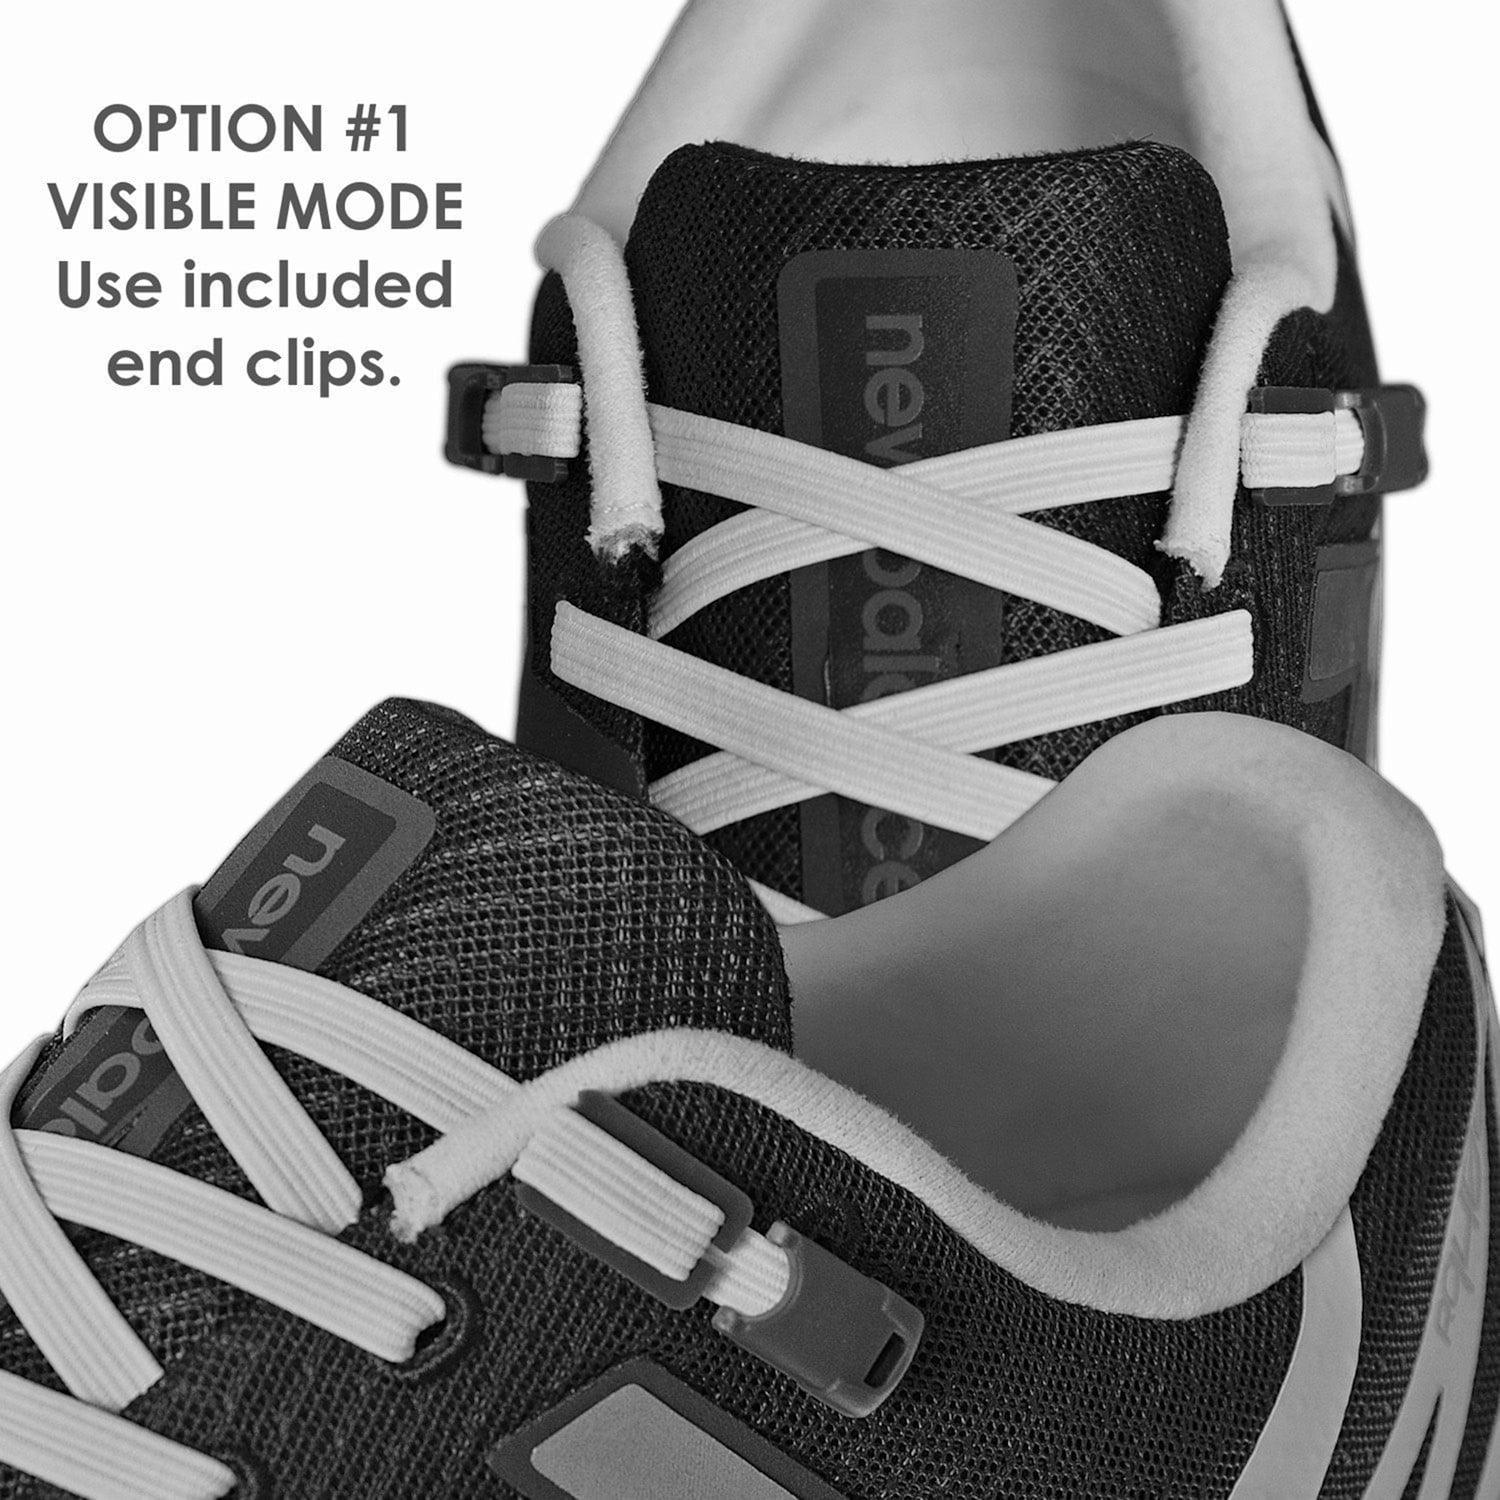 xpand no tie shoelaces system with elastic laces